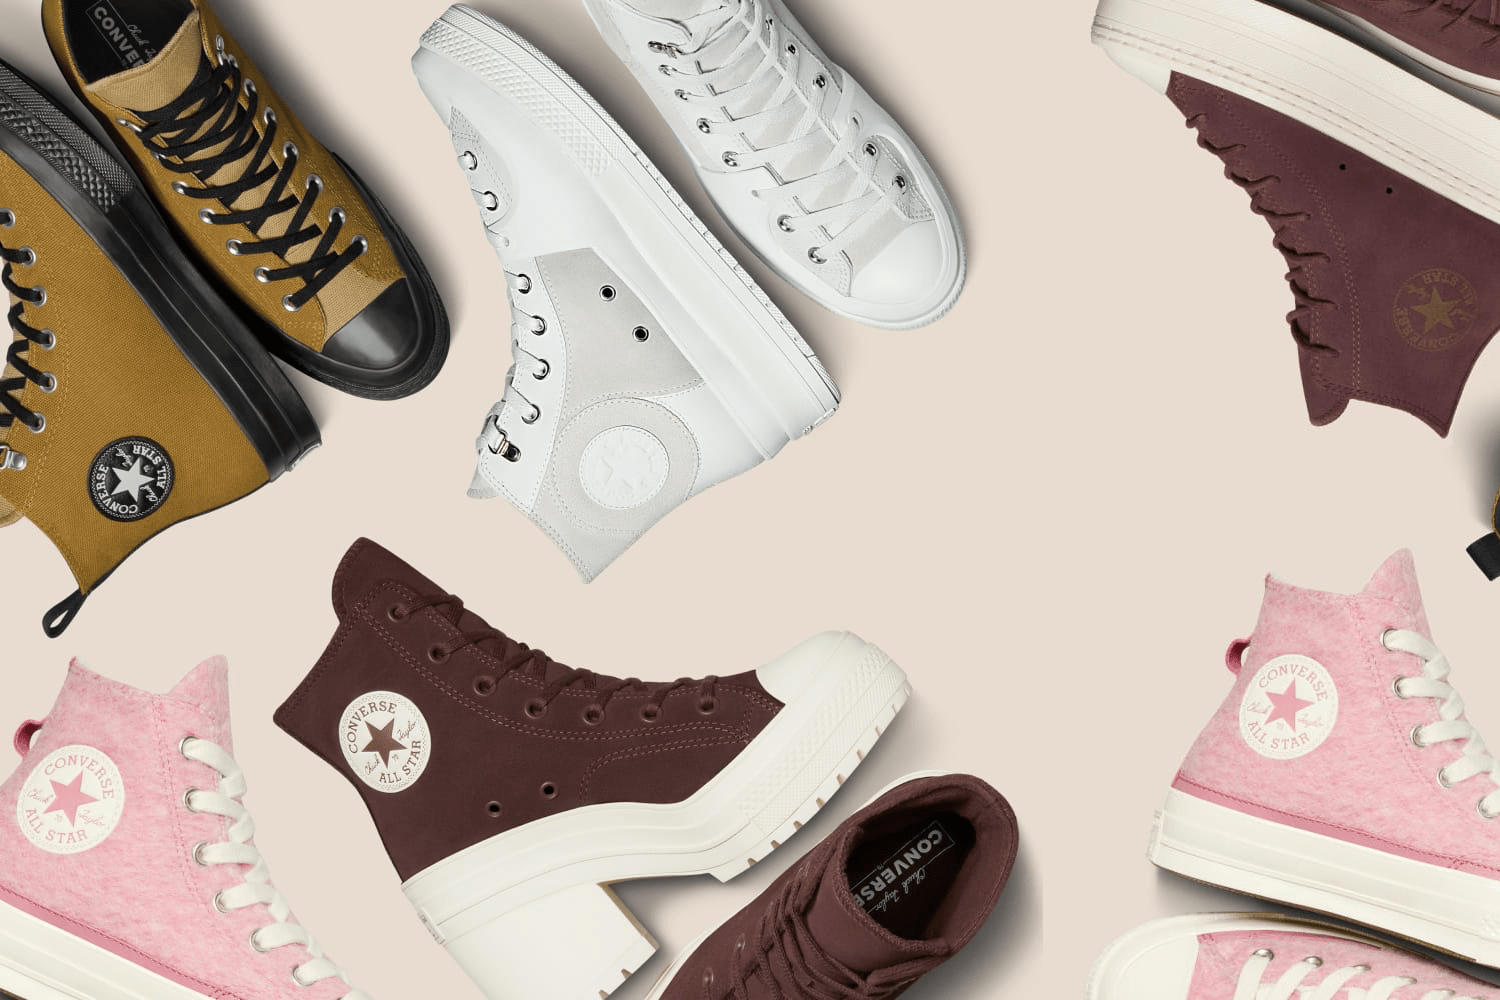 Get inspired for autumn with Converse